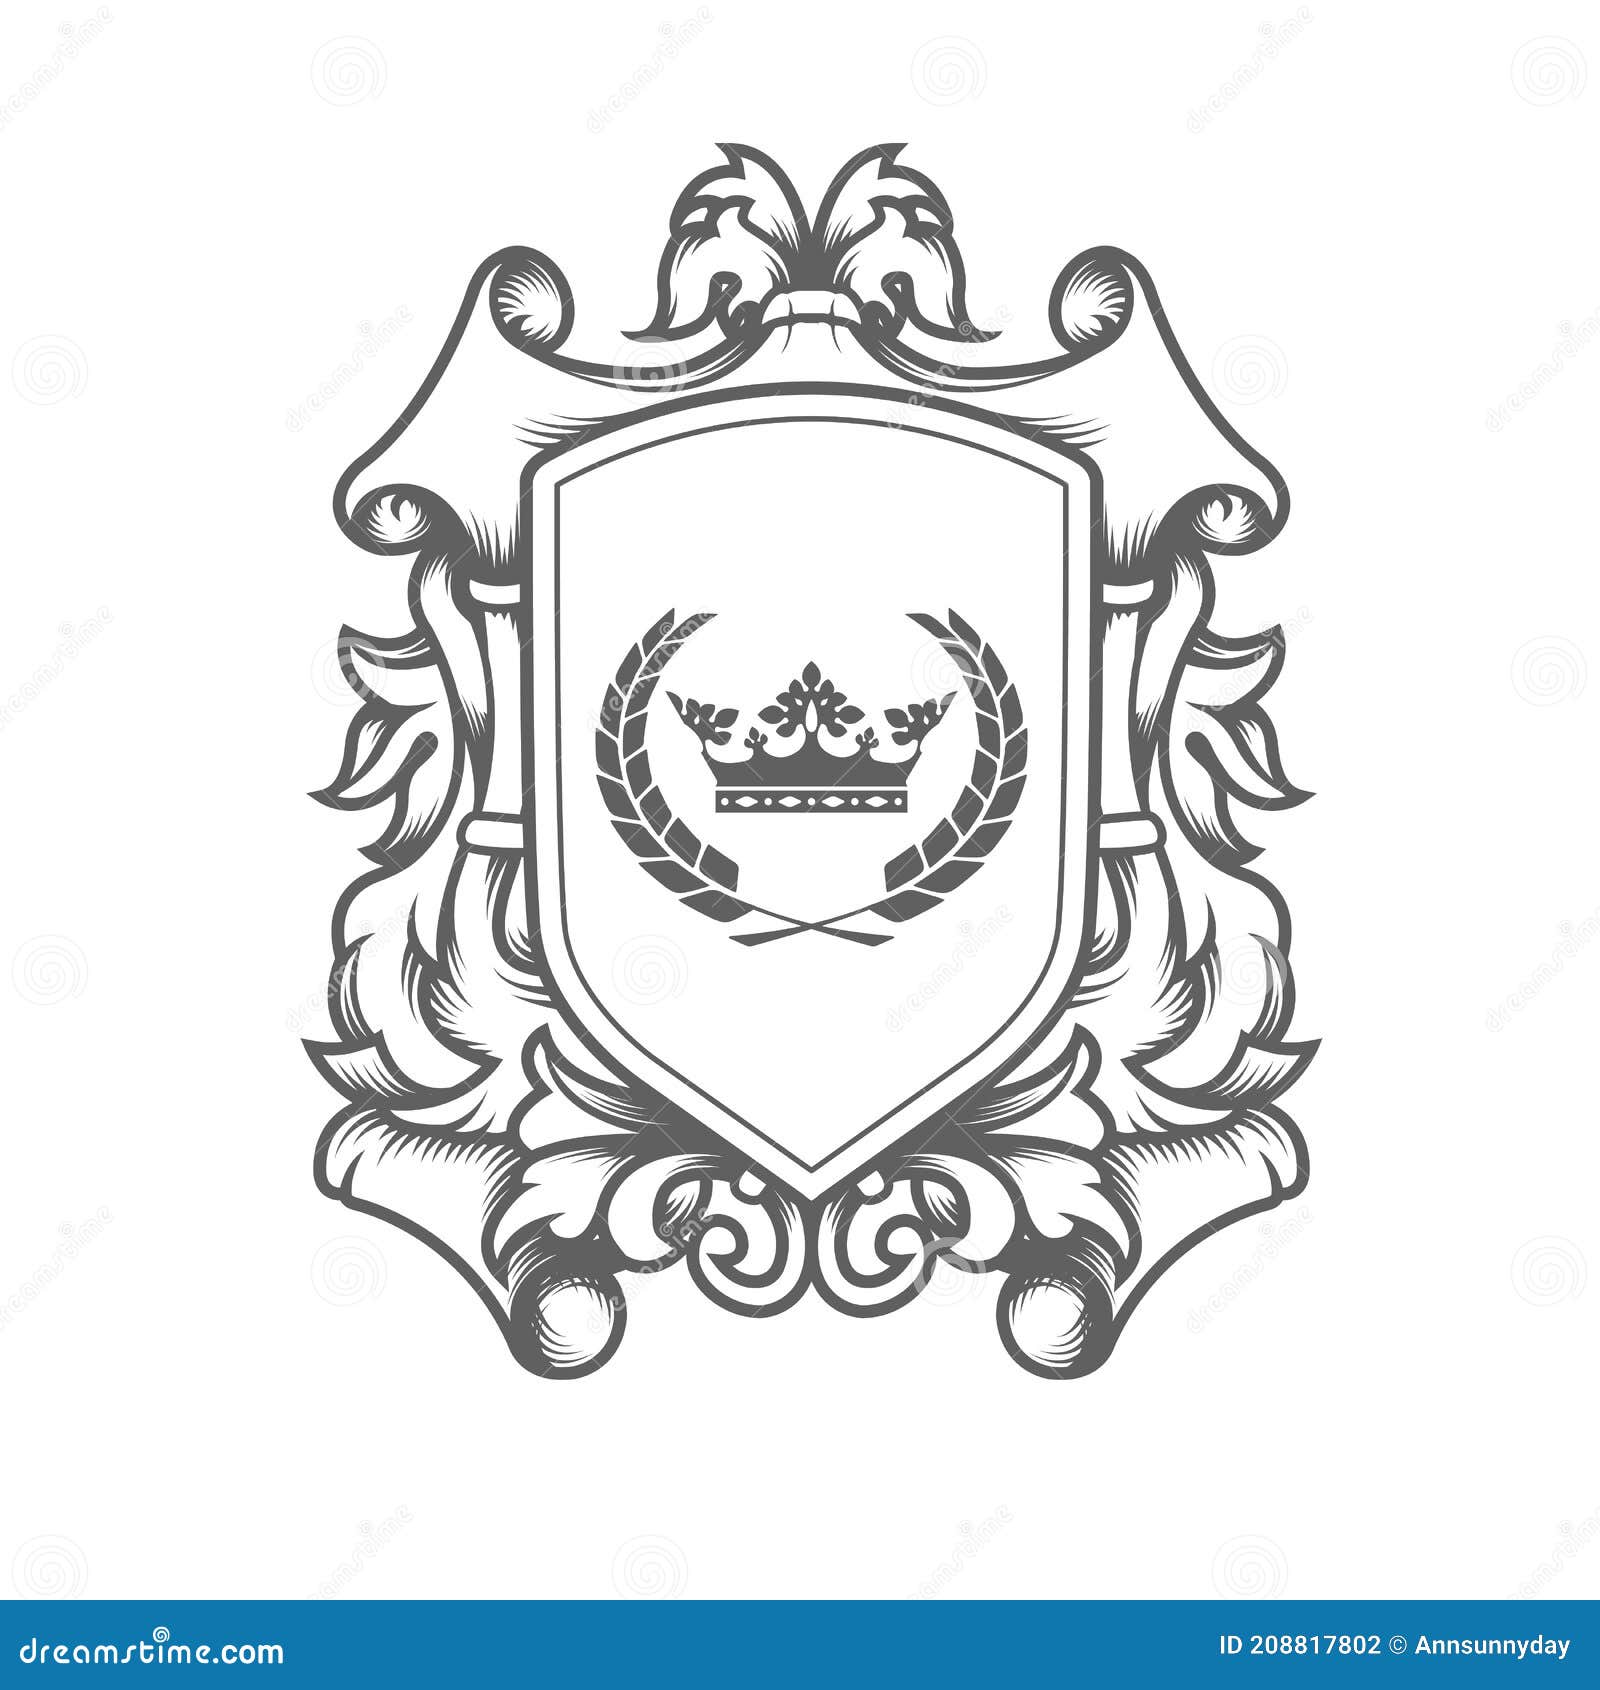 luxury imperial coat of arms template laced heraldic shield with king crown ancestral medieval crest or blazon